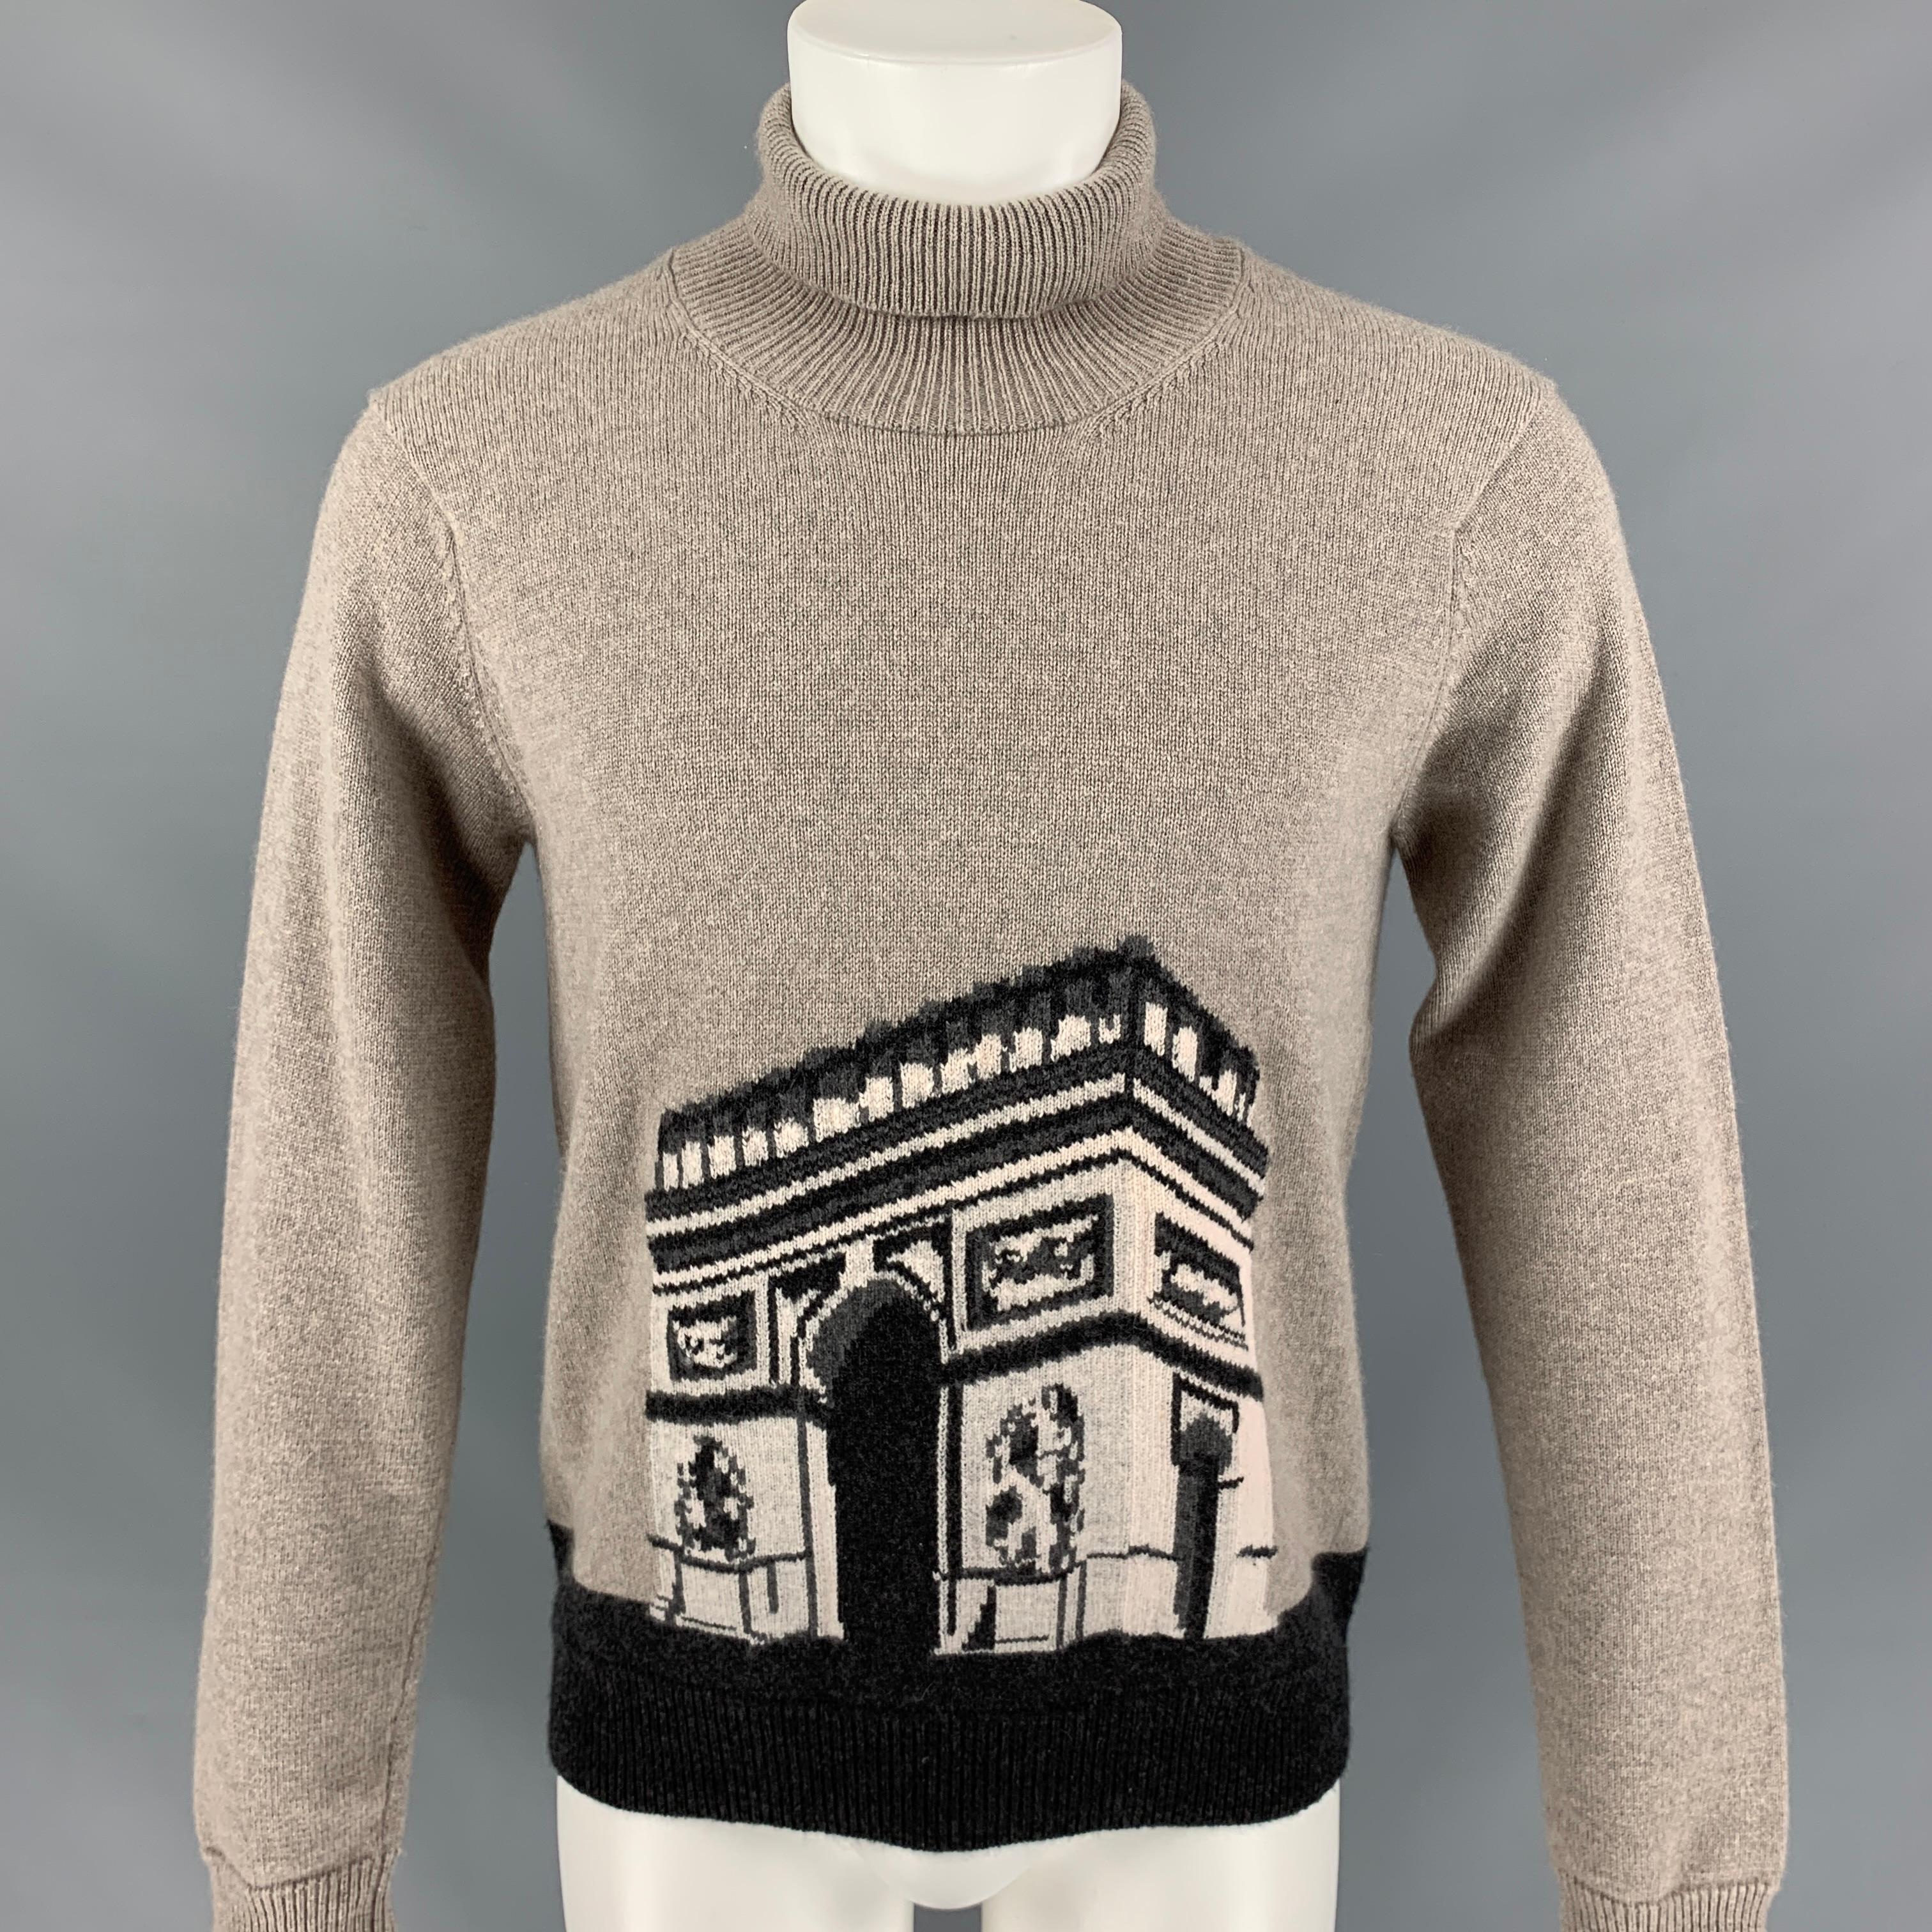 BURBERRY PRORSUM Fall 2014 sweater comes in a taupe & black cashmere with a 'Arch de Triumph' front design featuring a turtleneck. Made in United Kingdom. 

Excellent Pre-Owned Condition.
Marked: S

Measurements:

Shoulder: 18 in.
Chest: 40